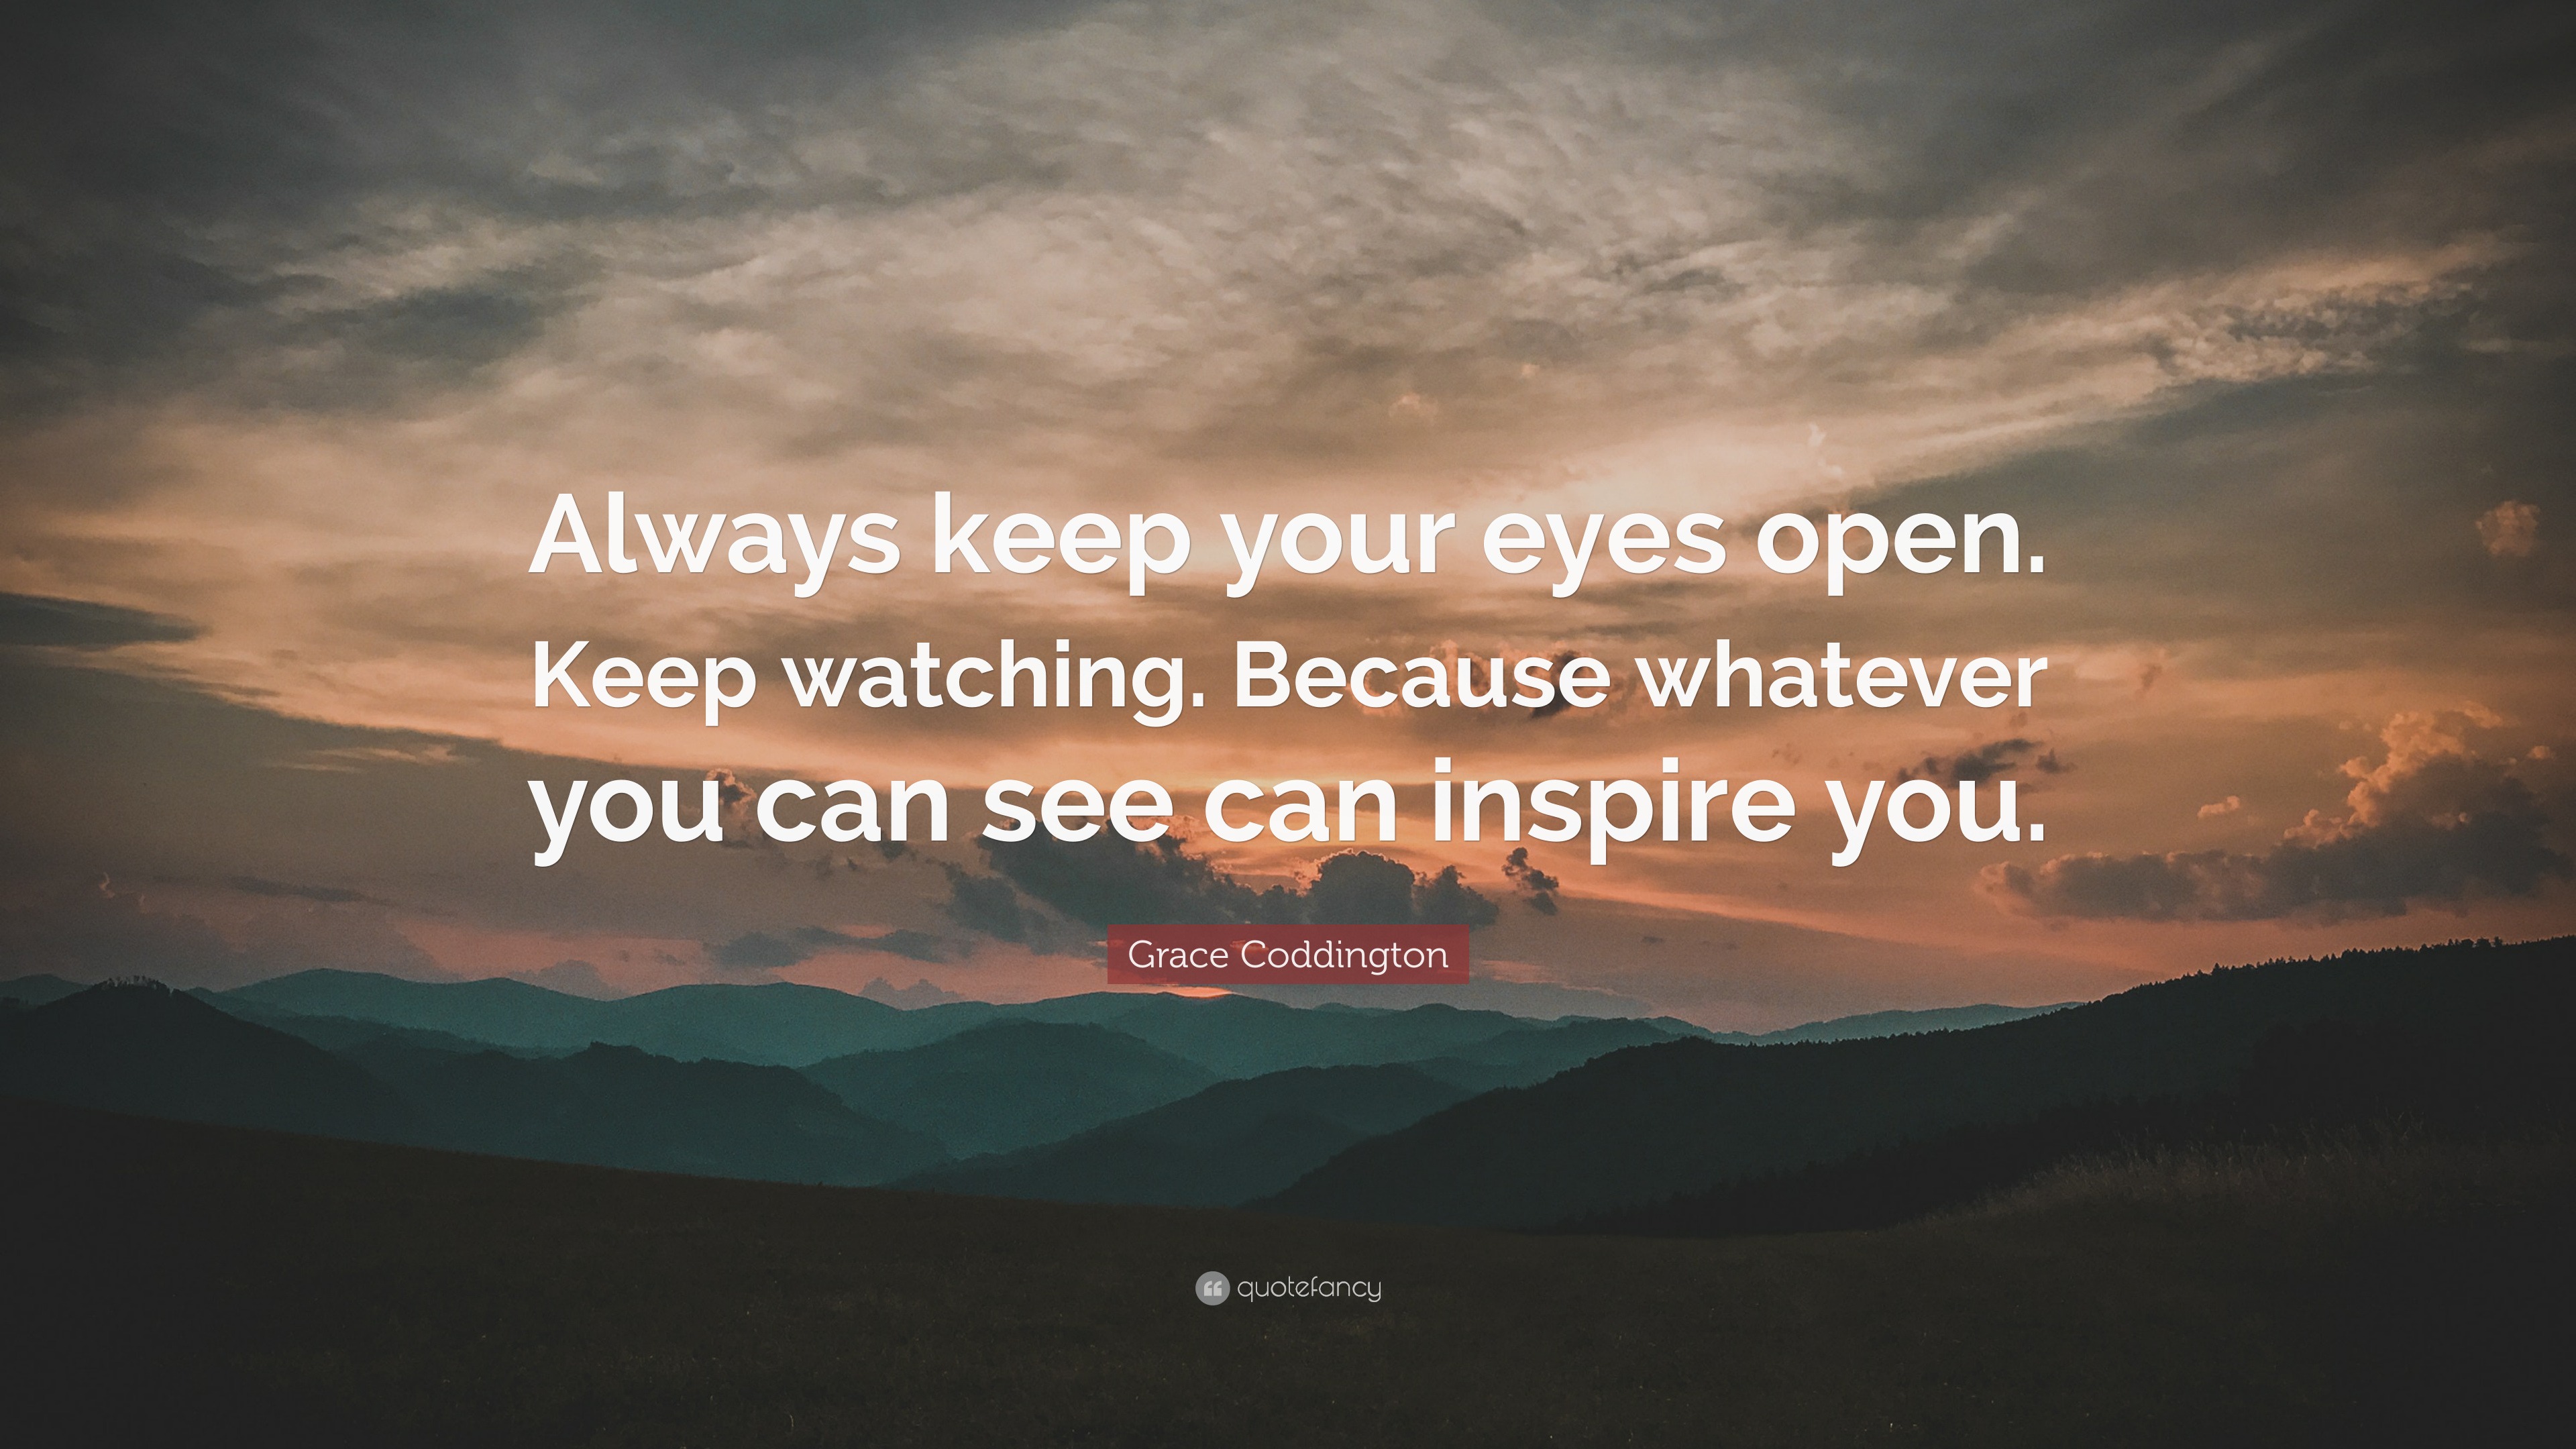 Grace Coddington Quote: “Always keep your eyes open. Keep watching